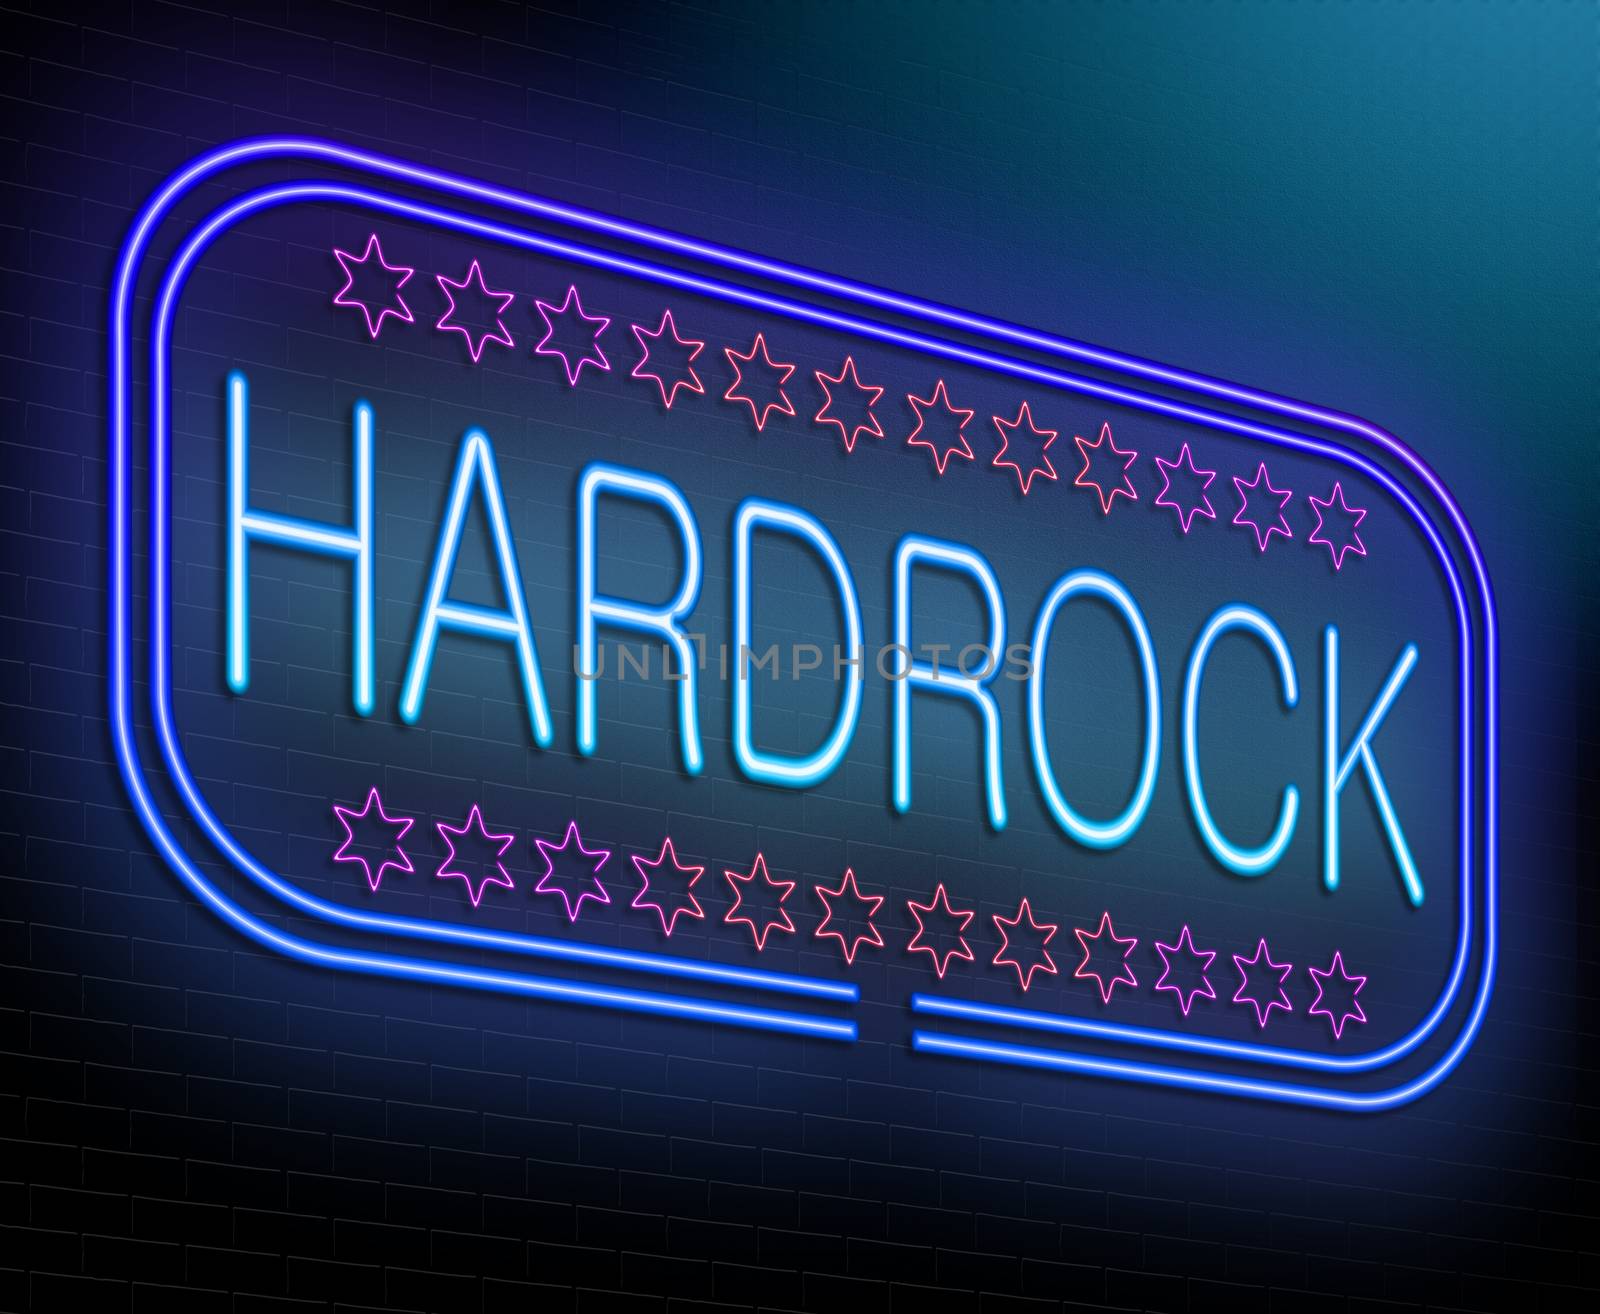 Illustration depicting an illuminated neon sign with a hard rock concept.